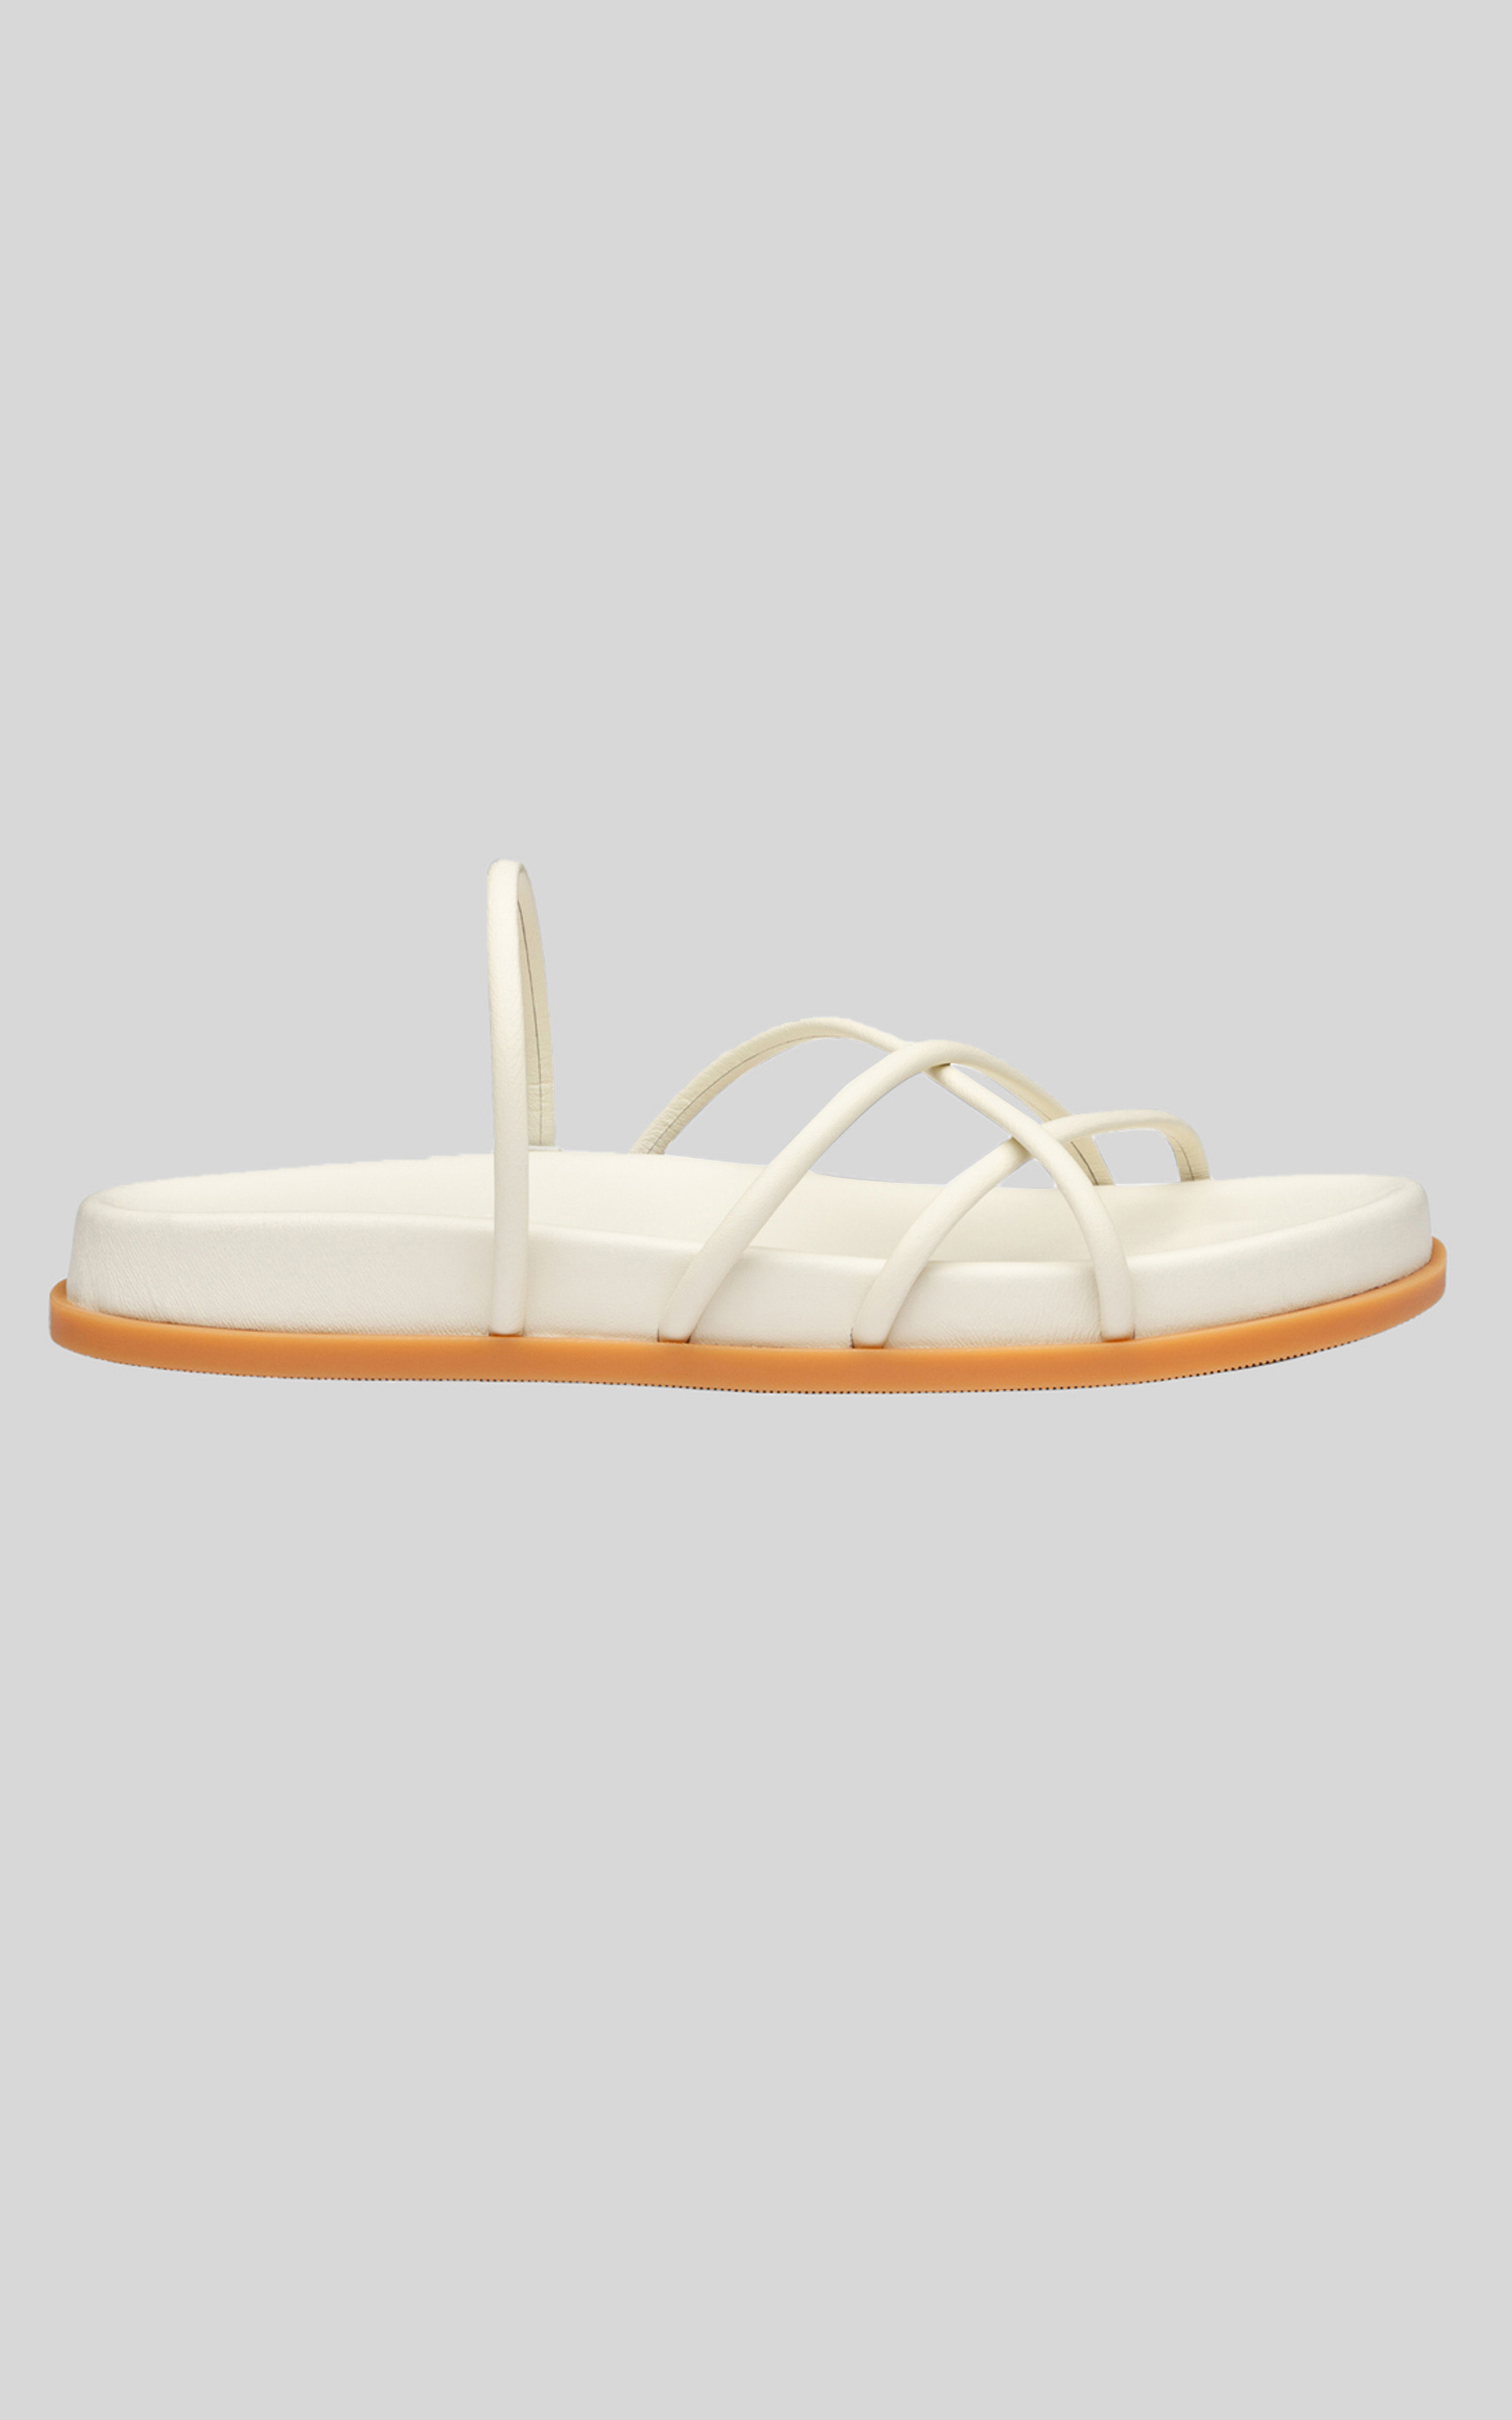 Sol Sana - Trixie Sandal in Off White - 05, WHT3, hi-res image number null